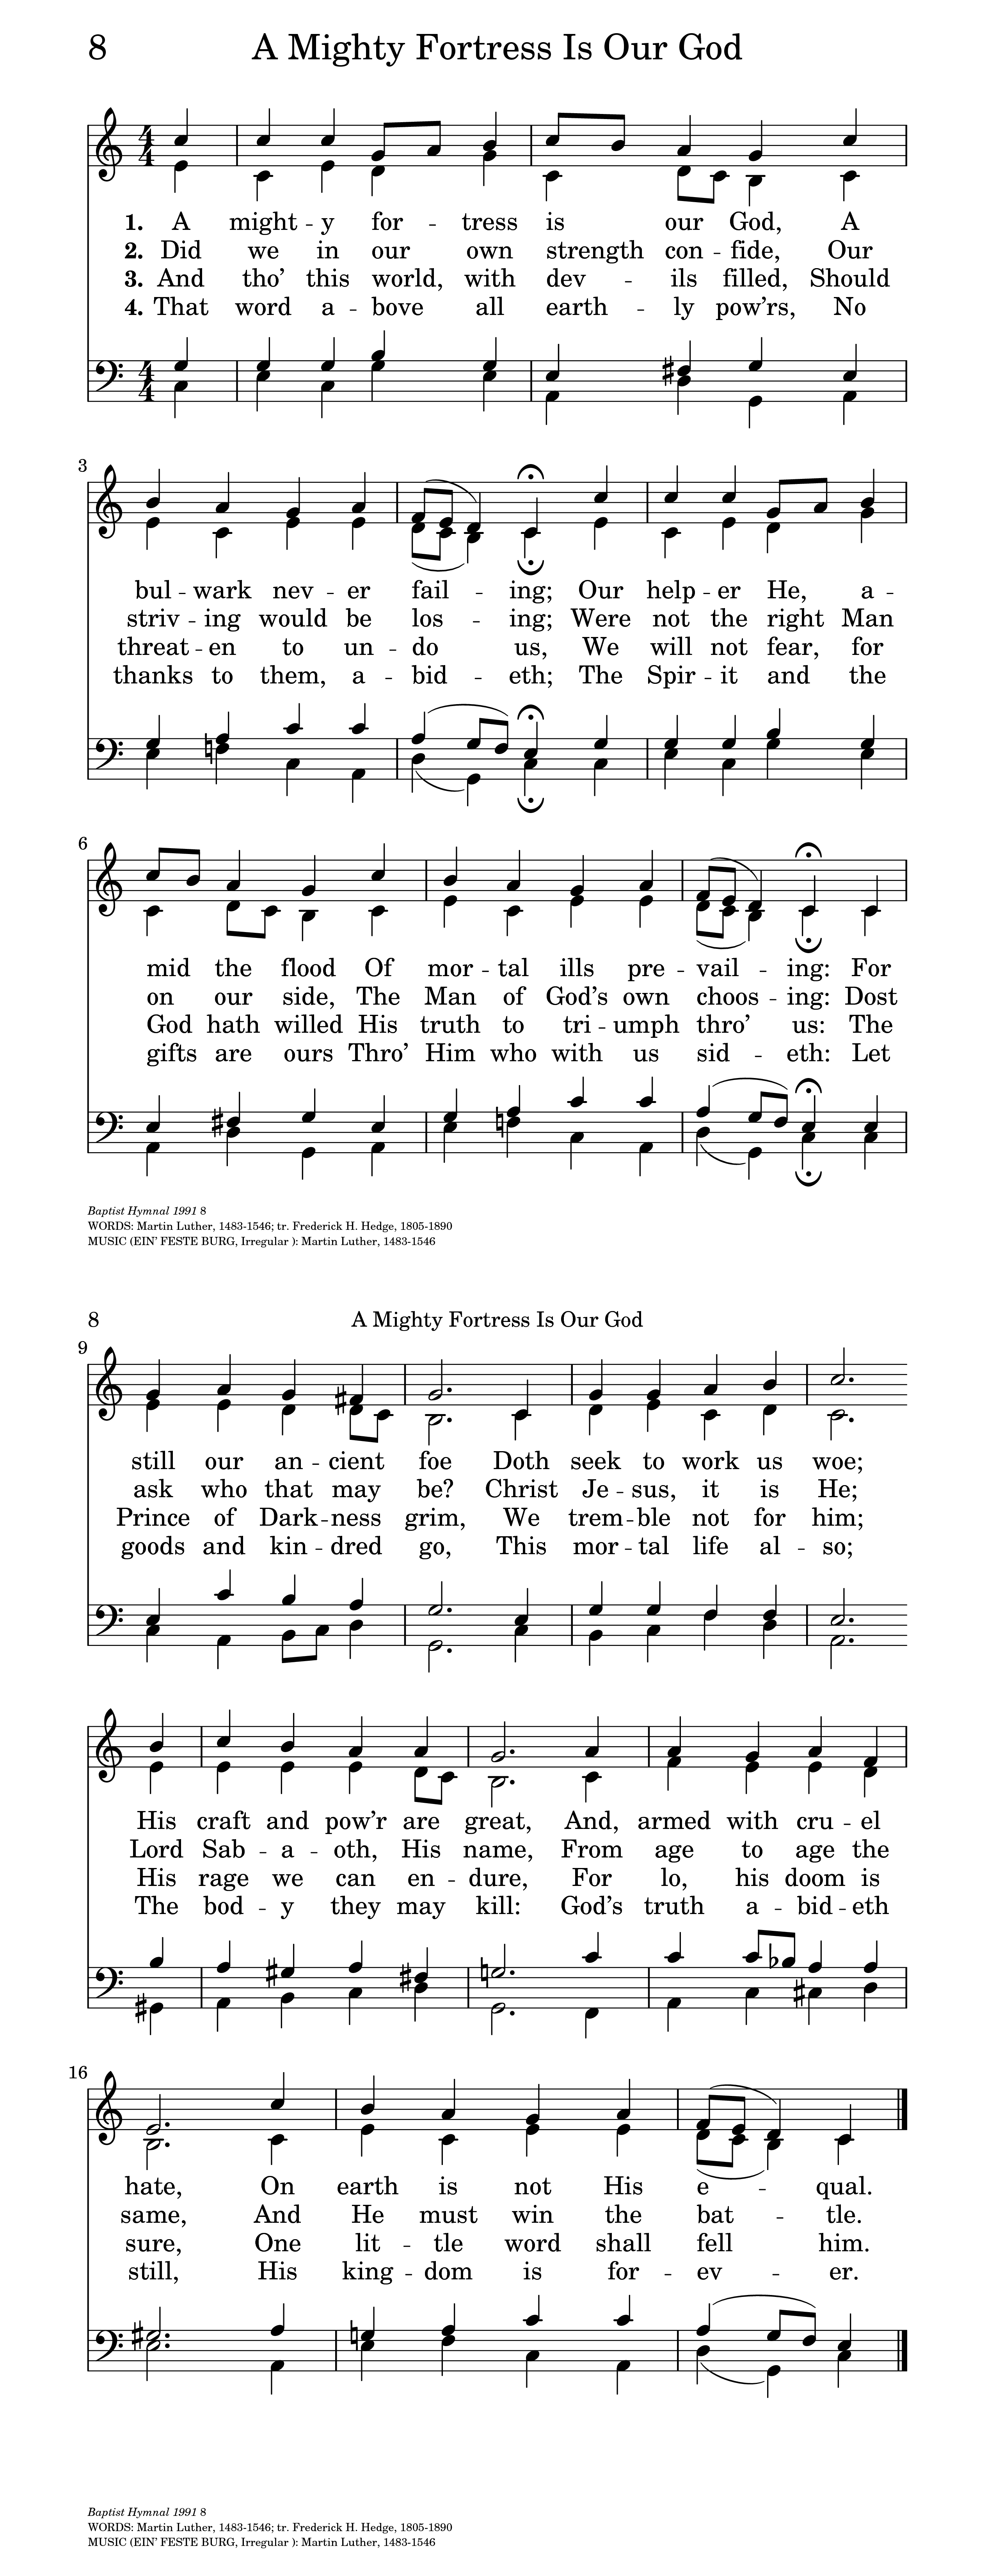 A Mighty Fortress Is Our God  Hymn, Christian song lyrics, Gospel